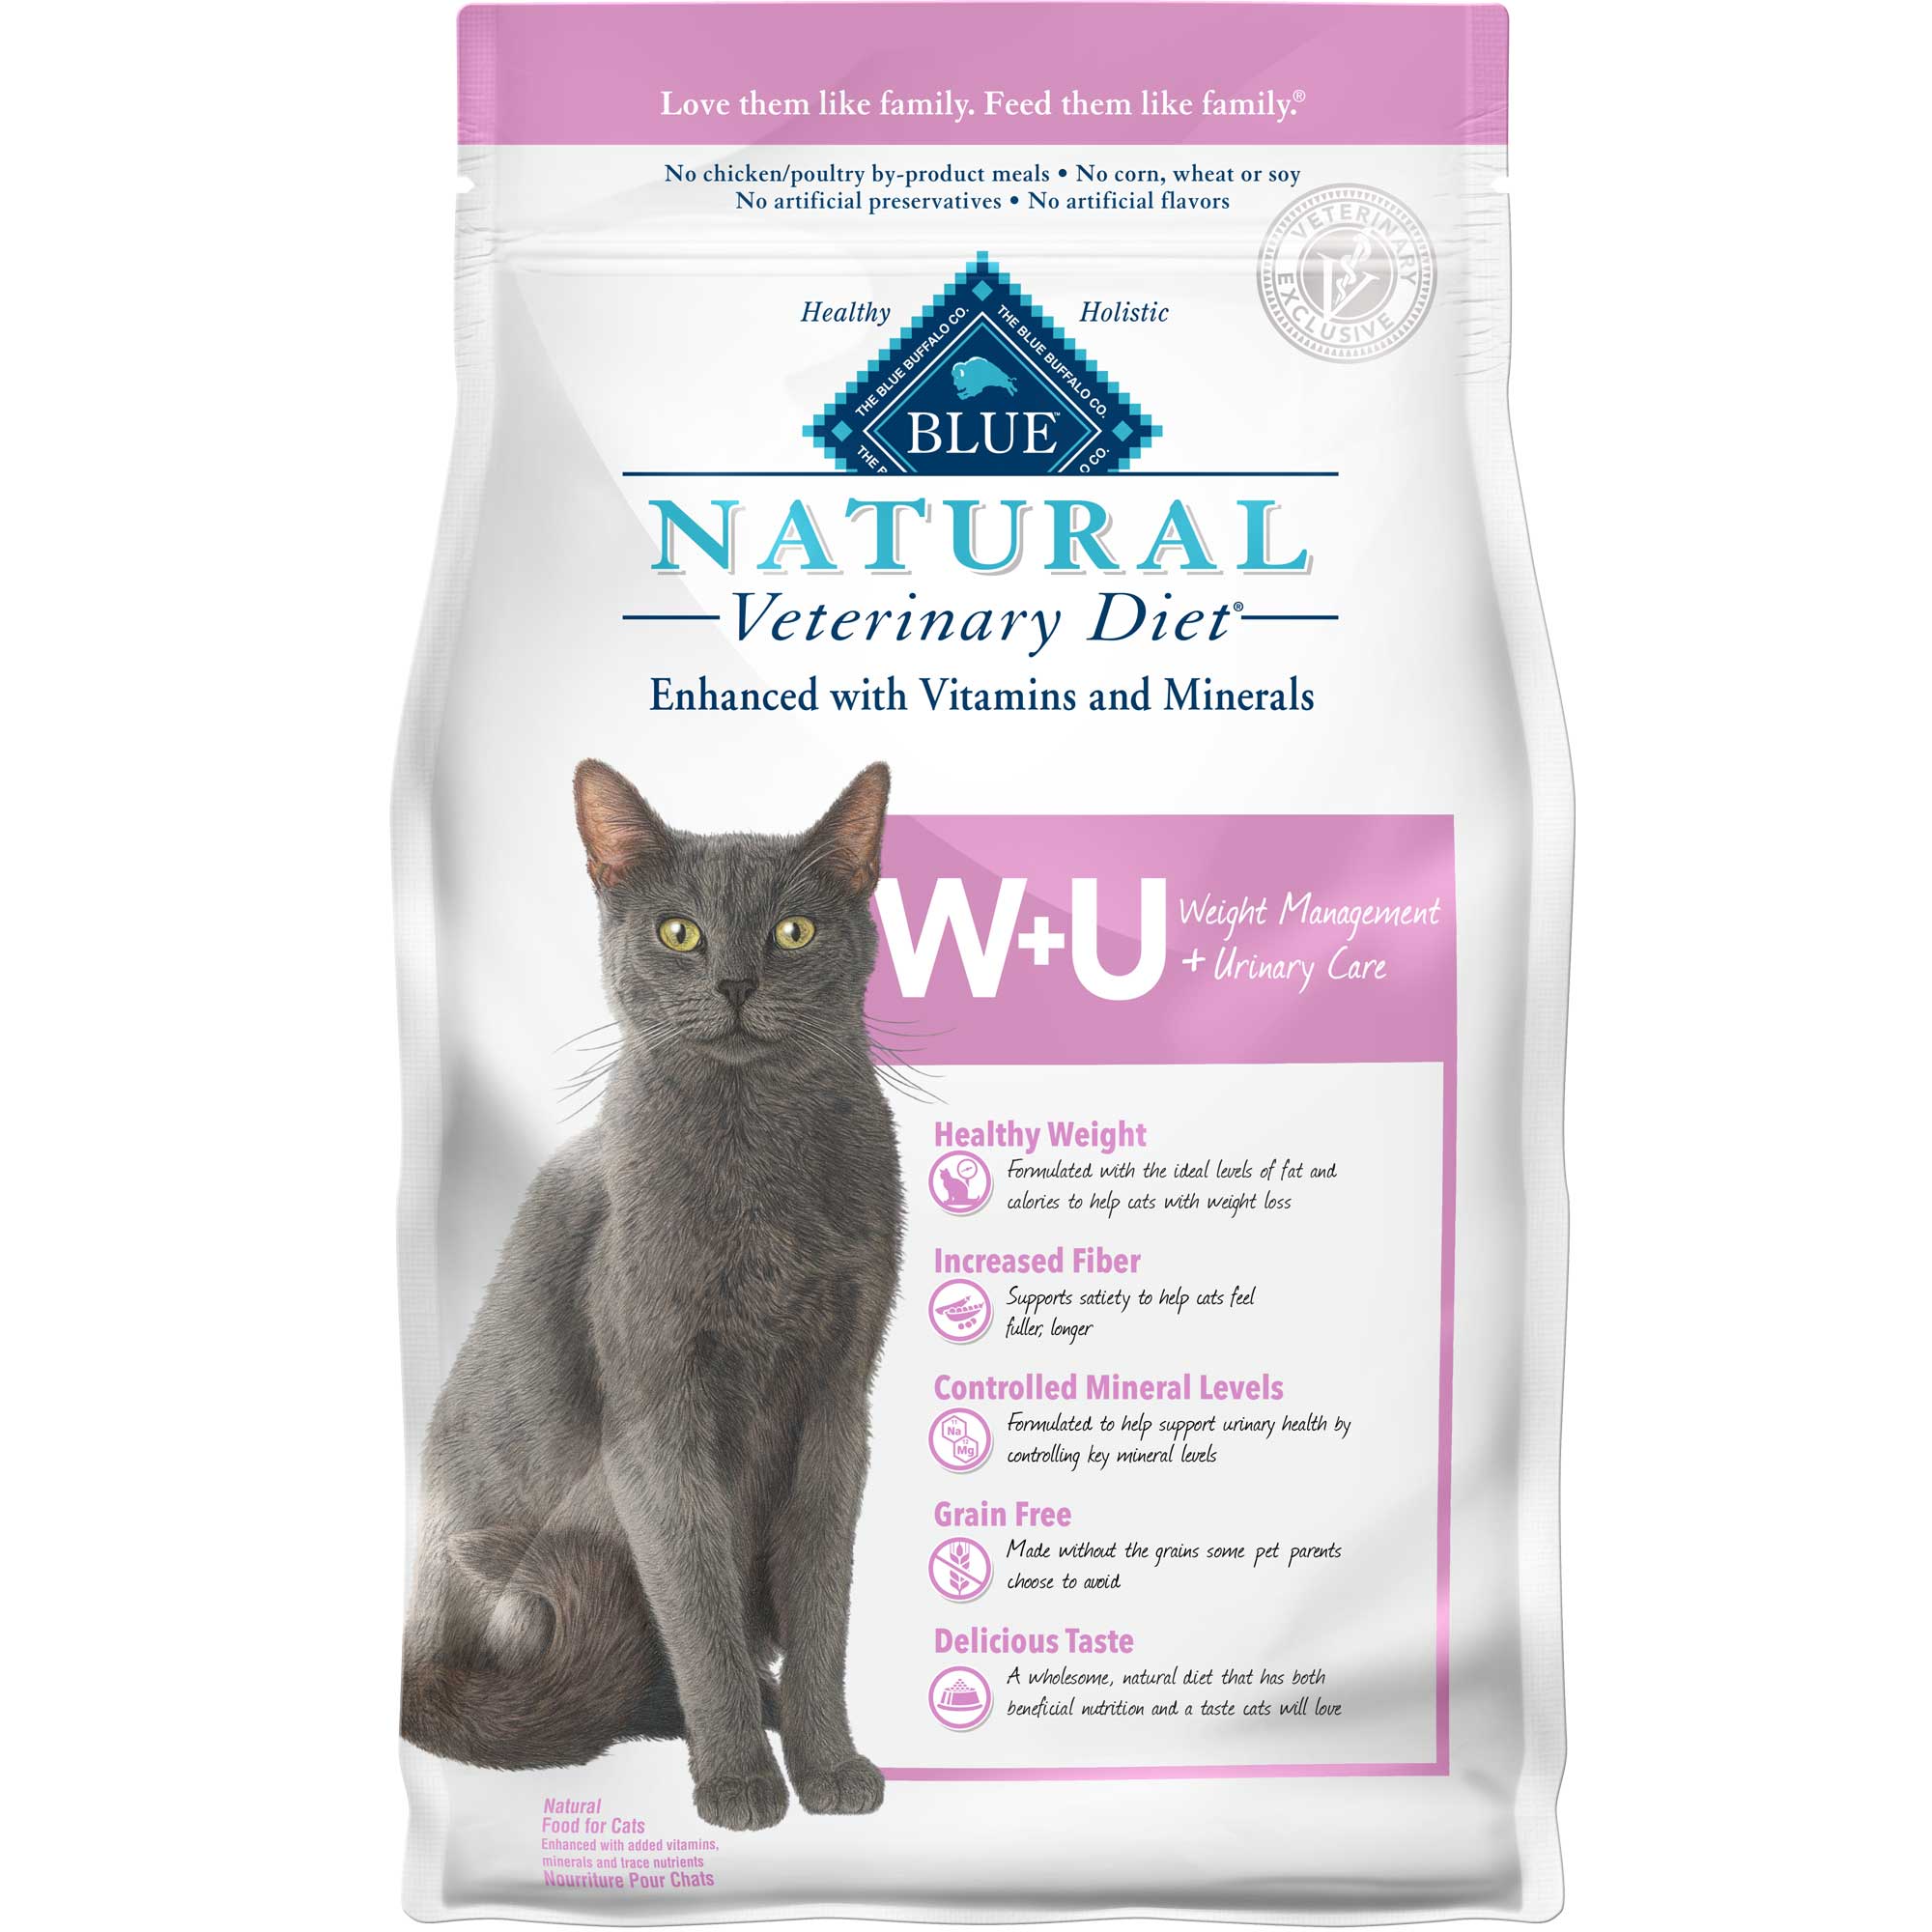 BLUE Natural Veterinary Diet W+U Weight Management + Urinary Care Dry Cat Food Usage